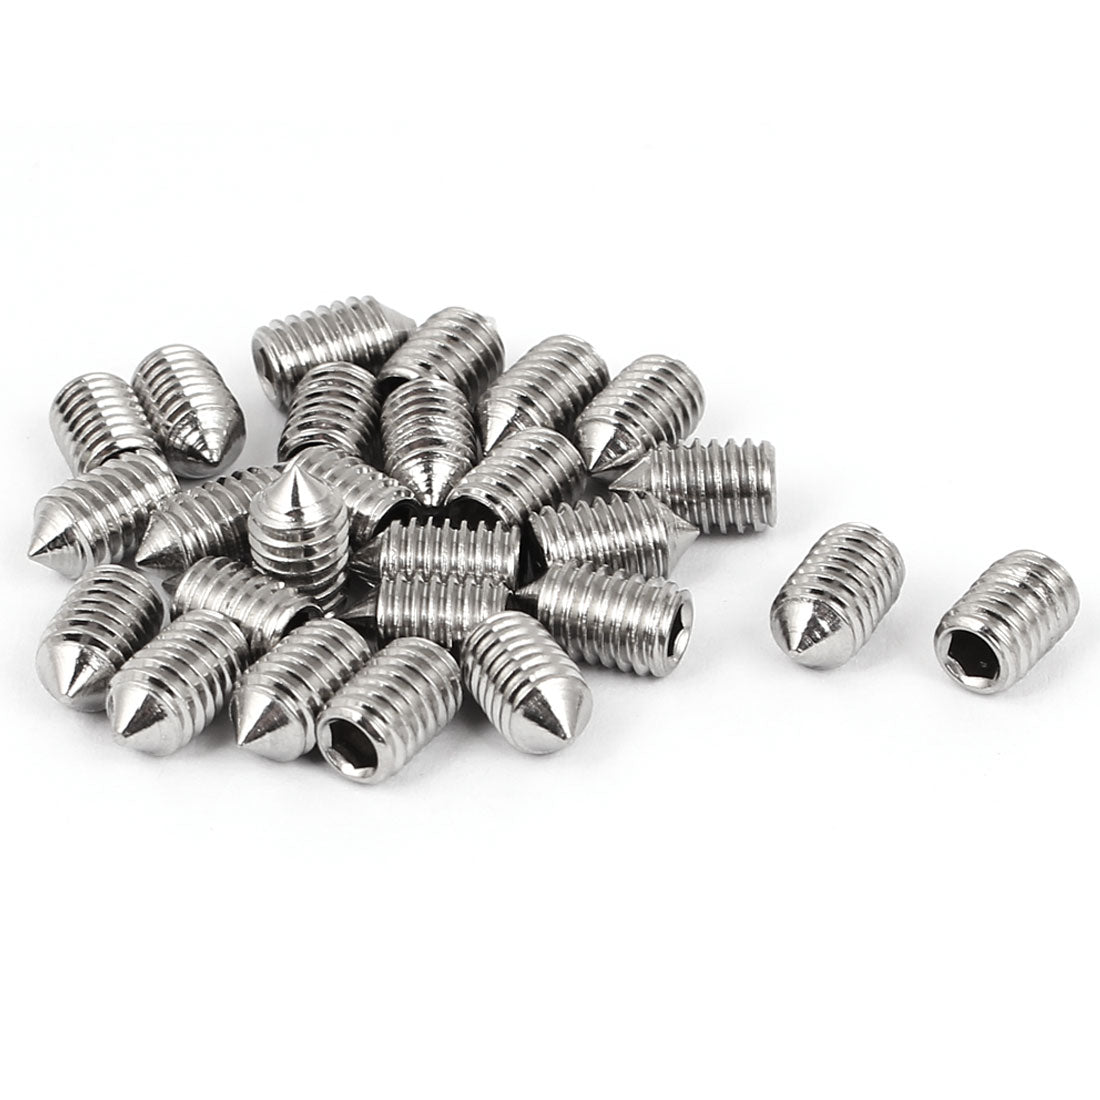 uxcell Uxcell M6 x 10mm 304 Stainless Steel Cone Point Hex Socket Set Grub Screw 25 Pcs